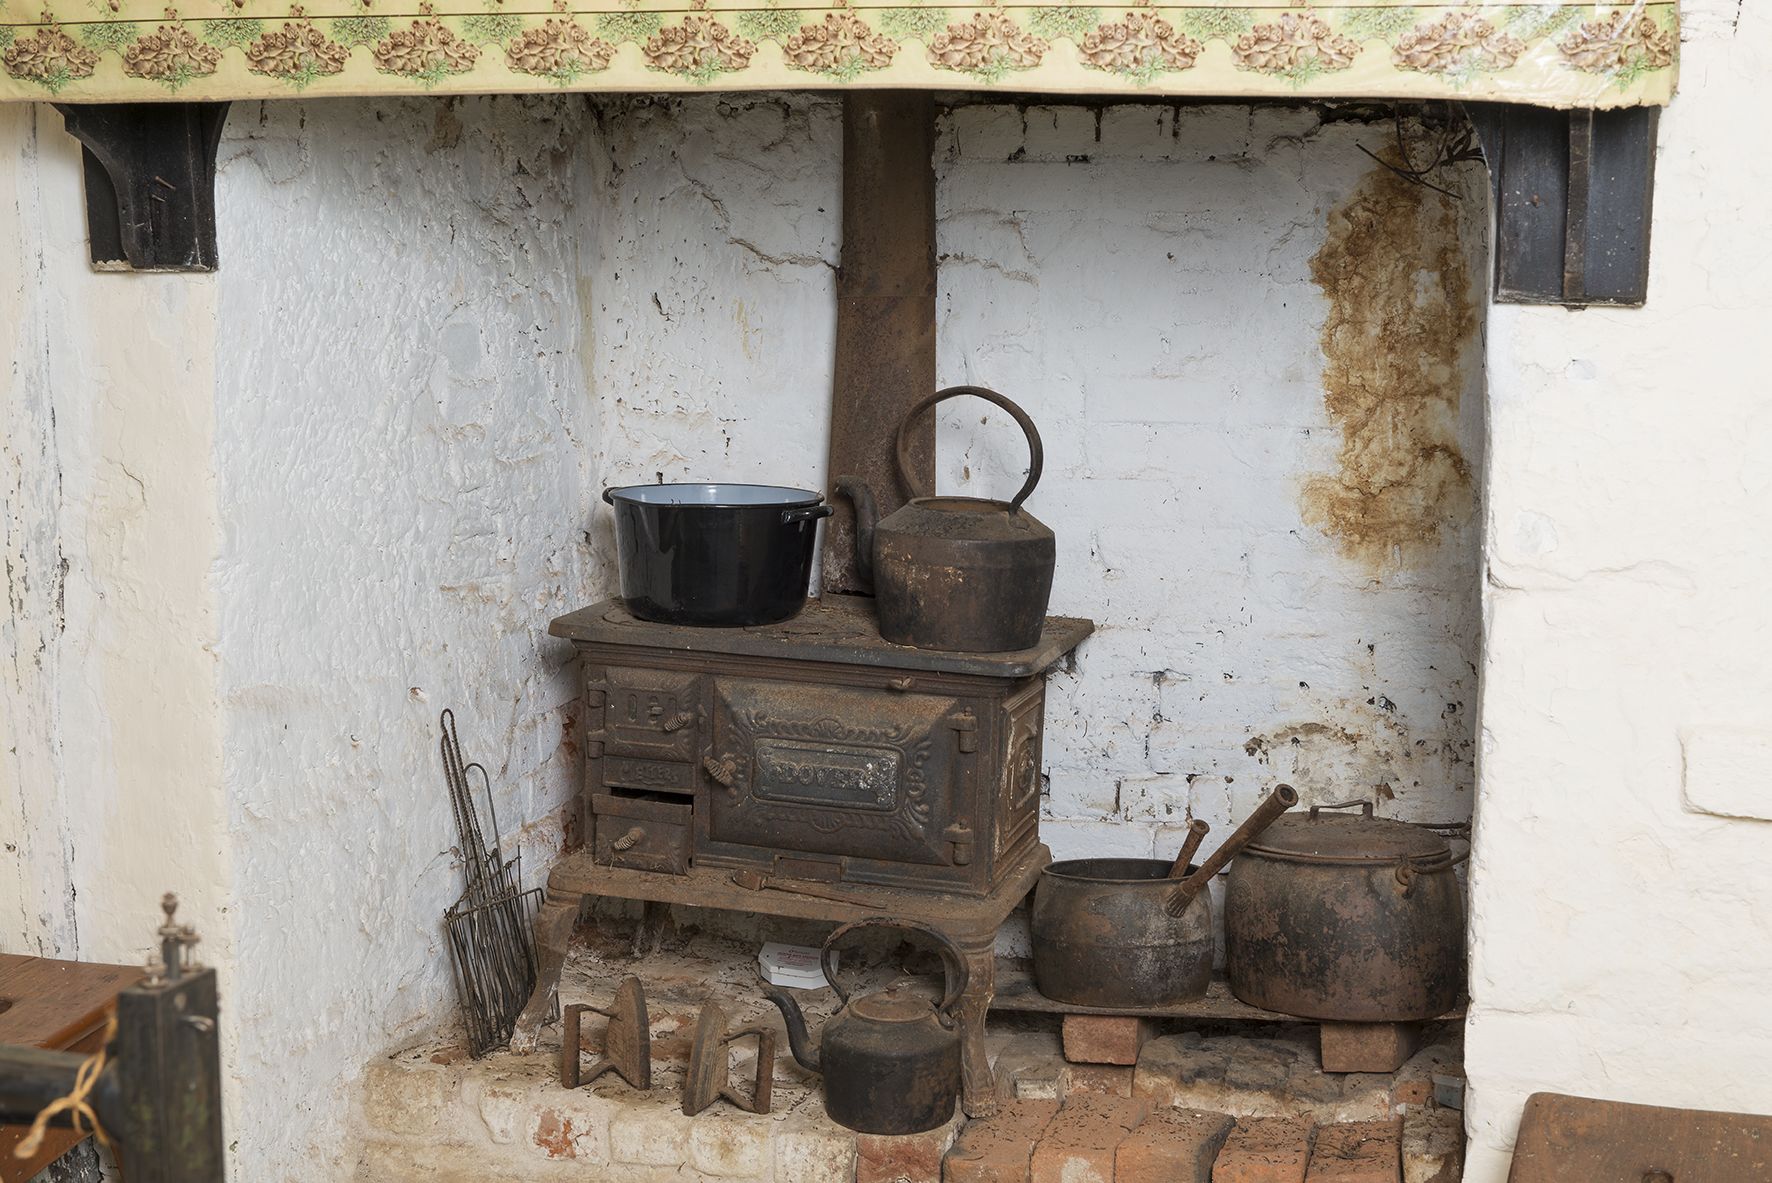 An old metters stove at Mugga Mugga Cottage kitchen sits in an acolve with white washed brick walls.